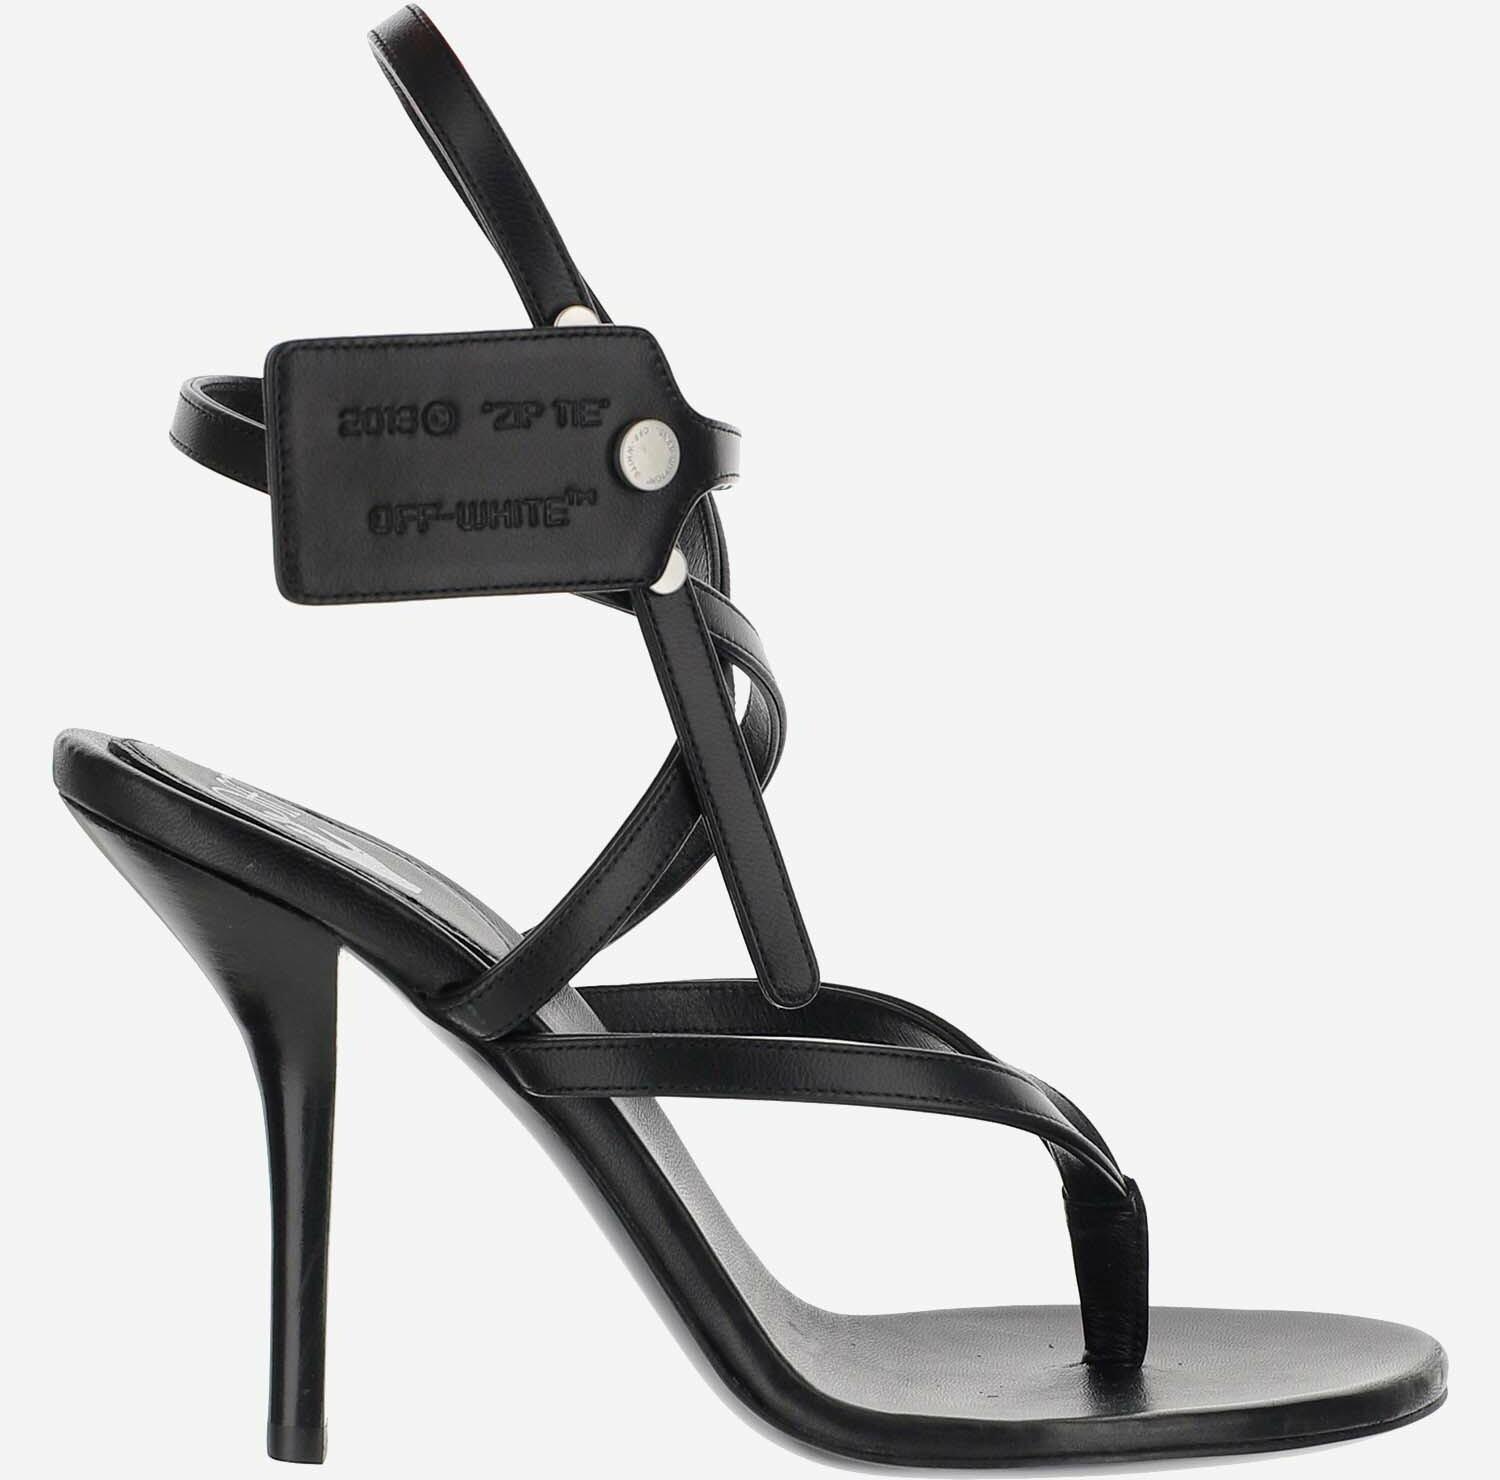 Off-White Leather High Heel Sandals 38 IT/EU at FORZIERI